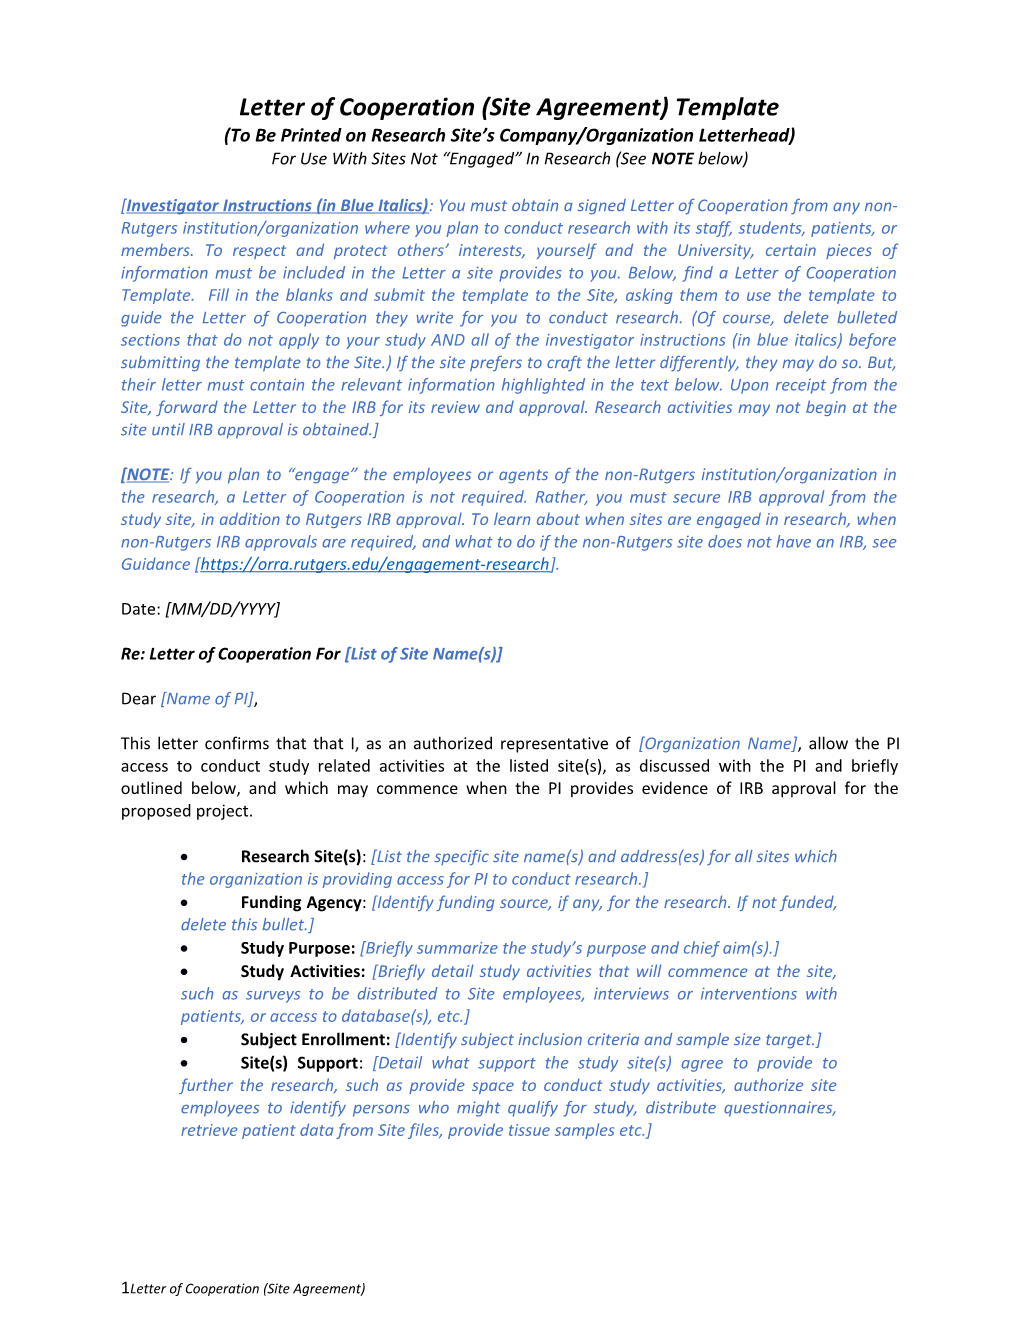 Letter of Cooperation (Site Agreement) Template